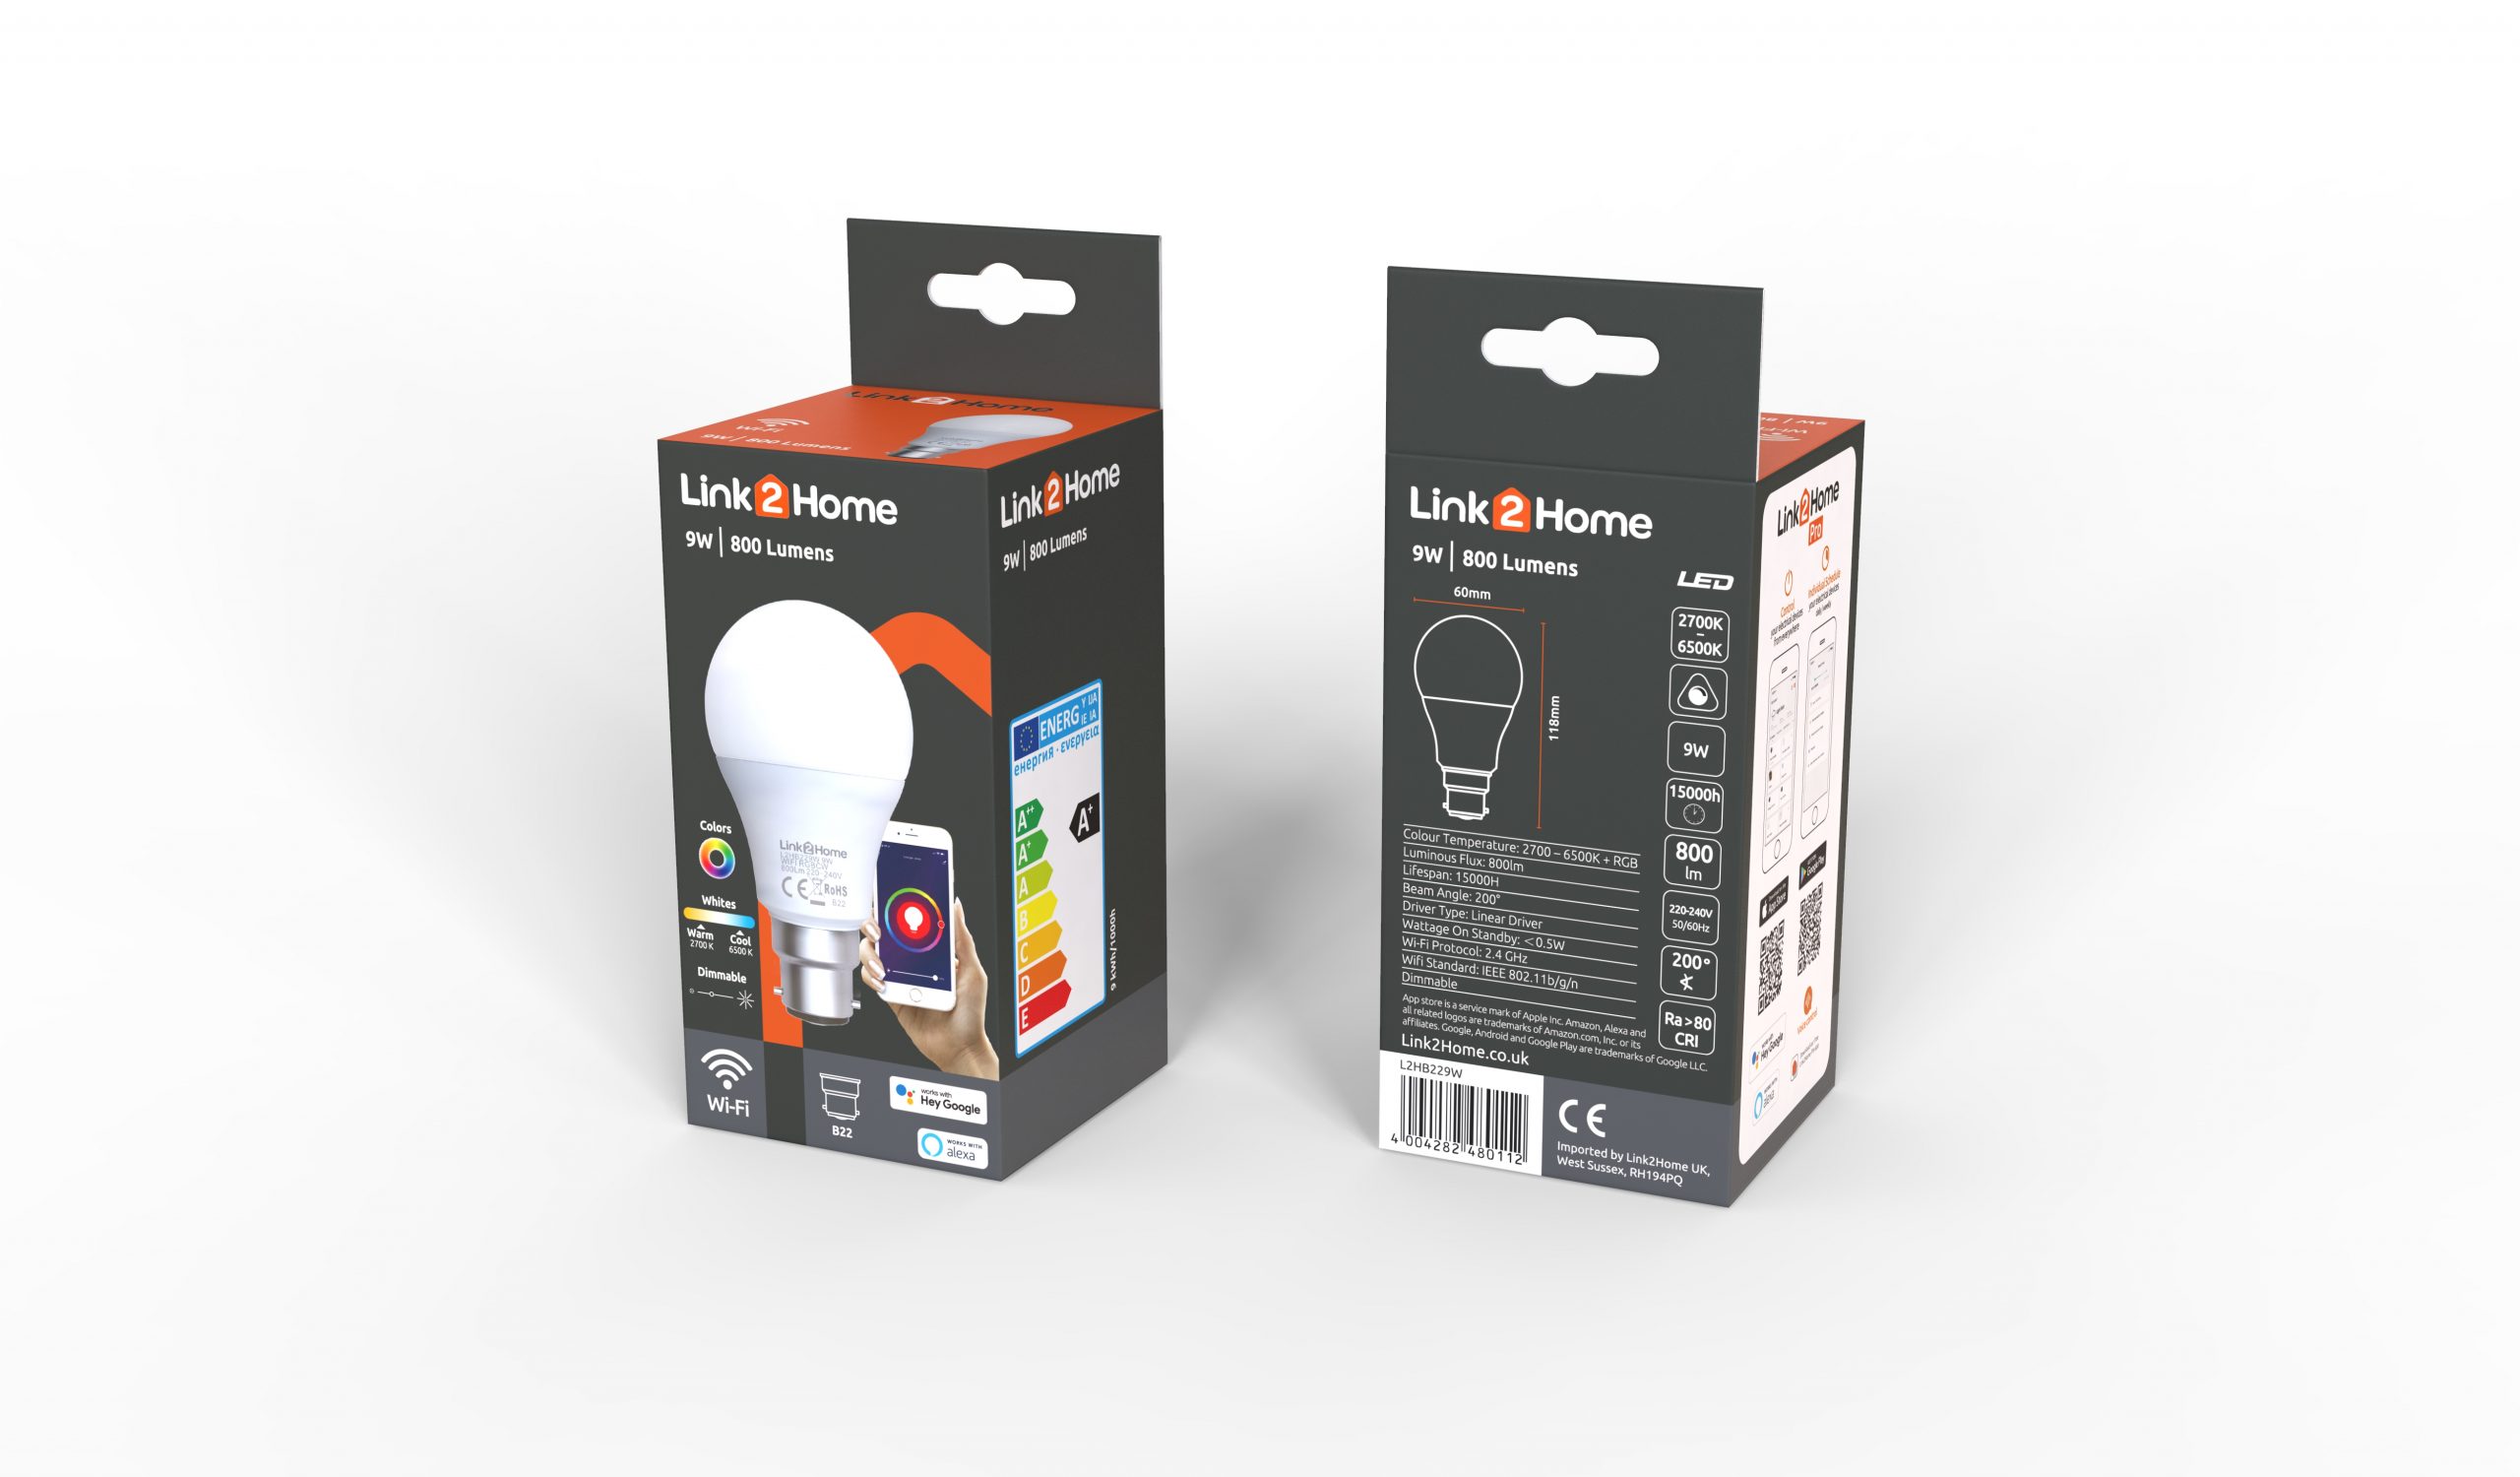 Smart, lamp, bulb, home automation, lighting, LED, SMG, RGB, dimmable, dicco, colour, color, white, cool, warm, app control, group, alexa, google, voice, security